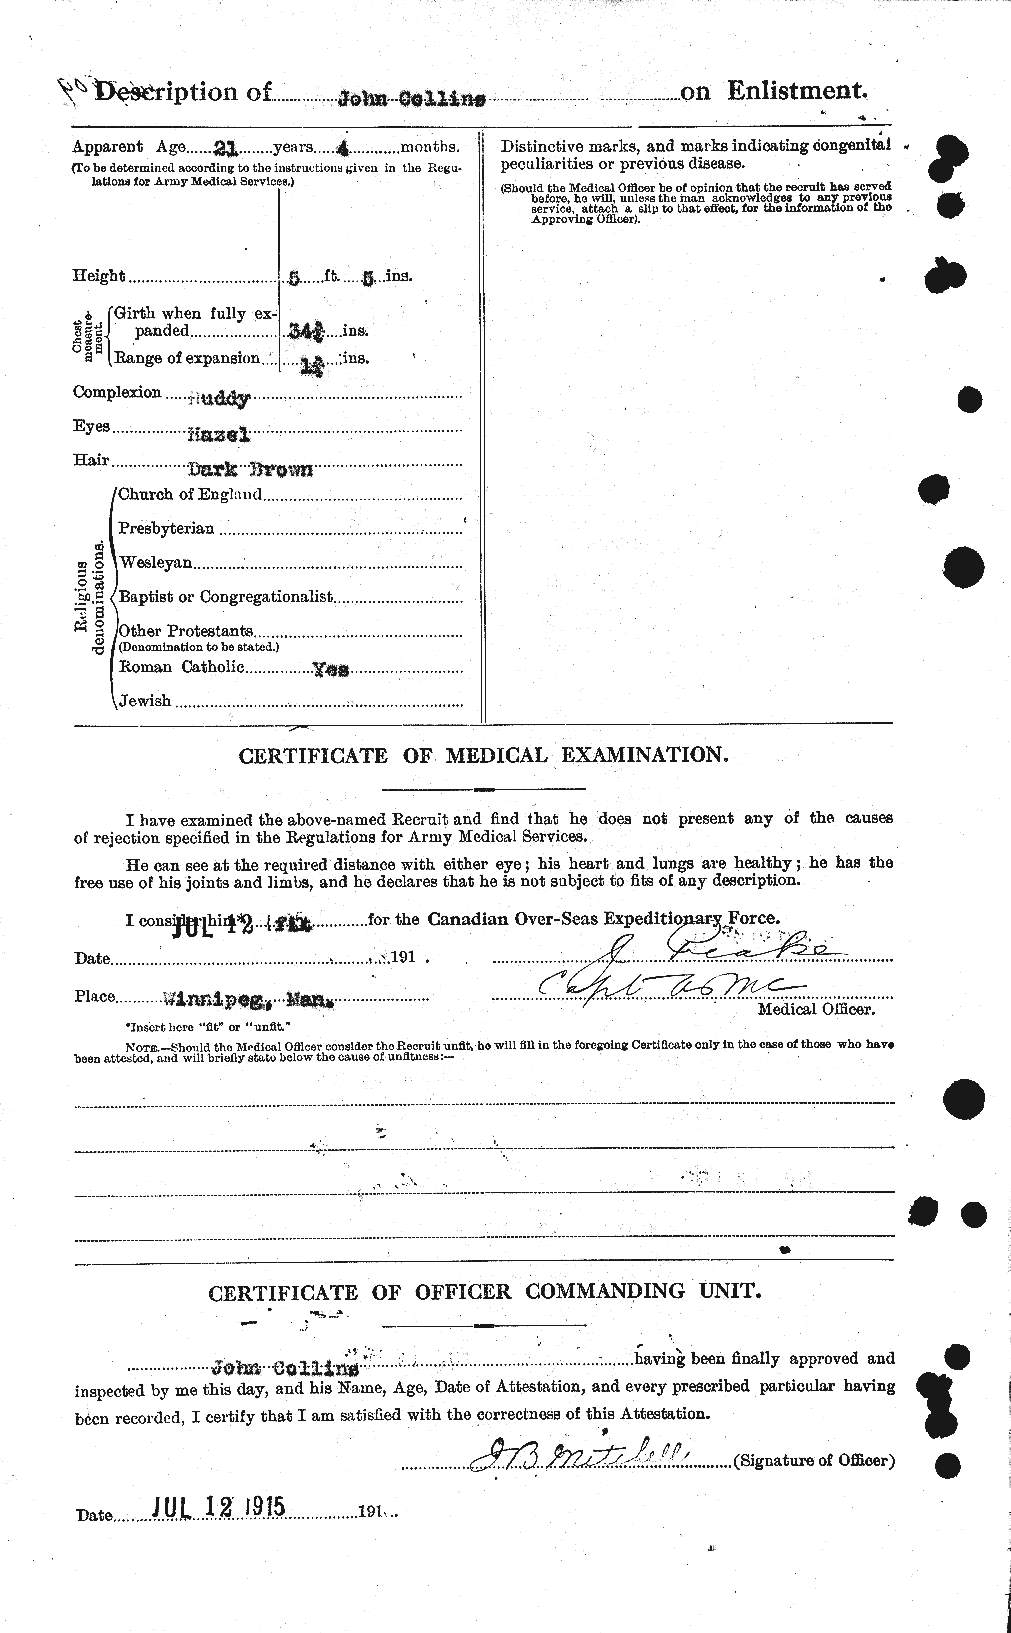 Personnel Records of the First World War - CEF 069794b